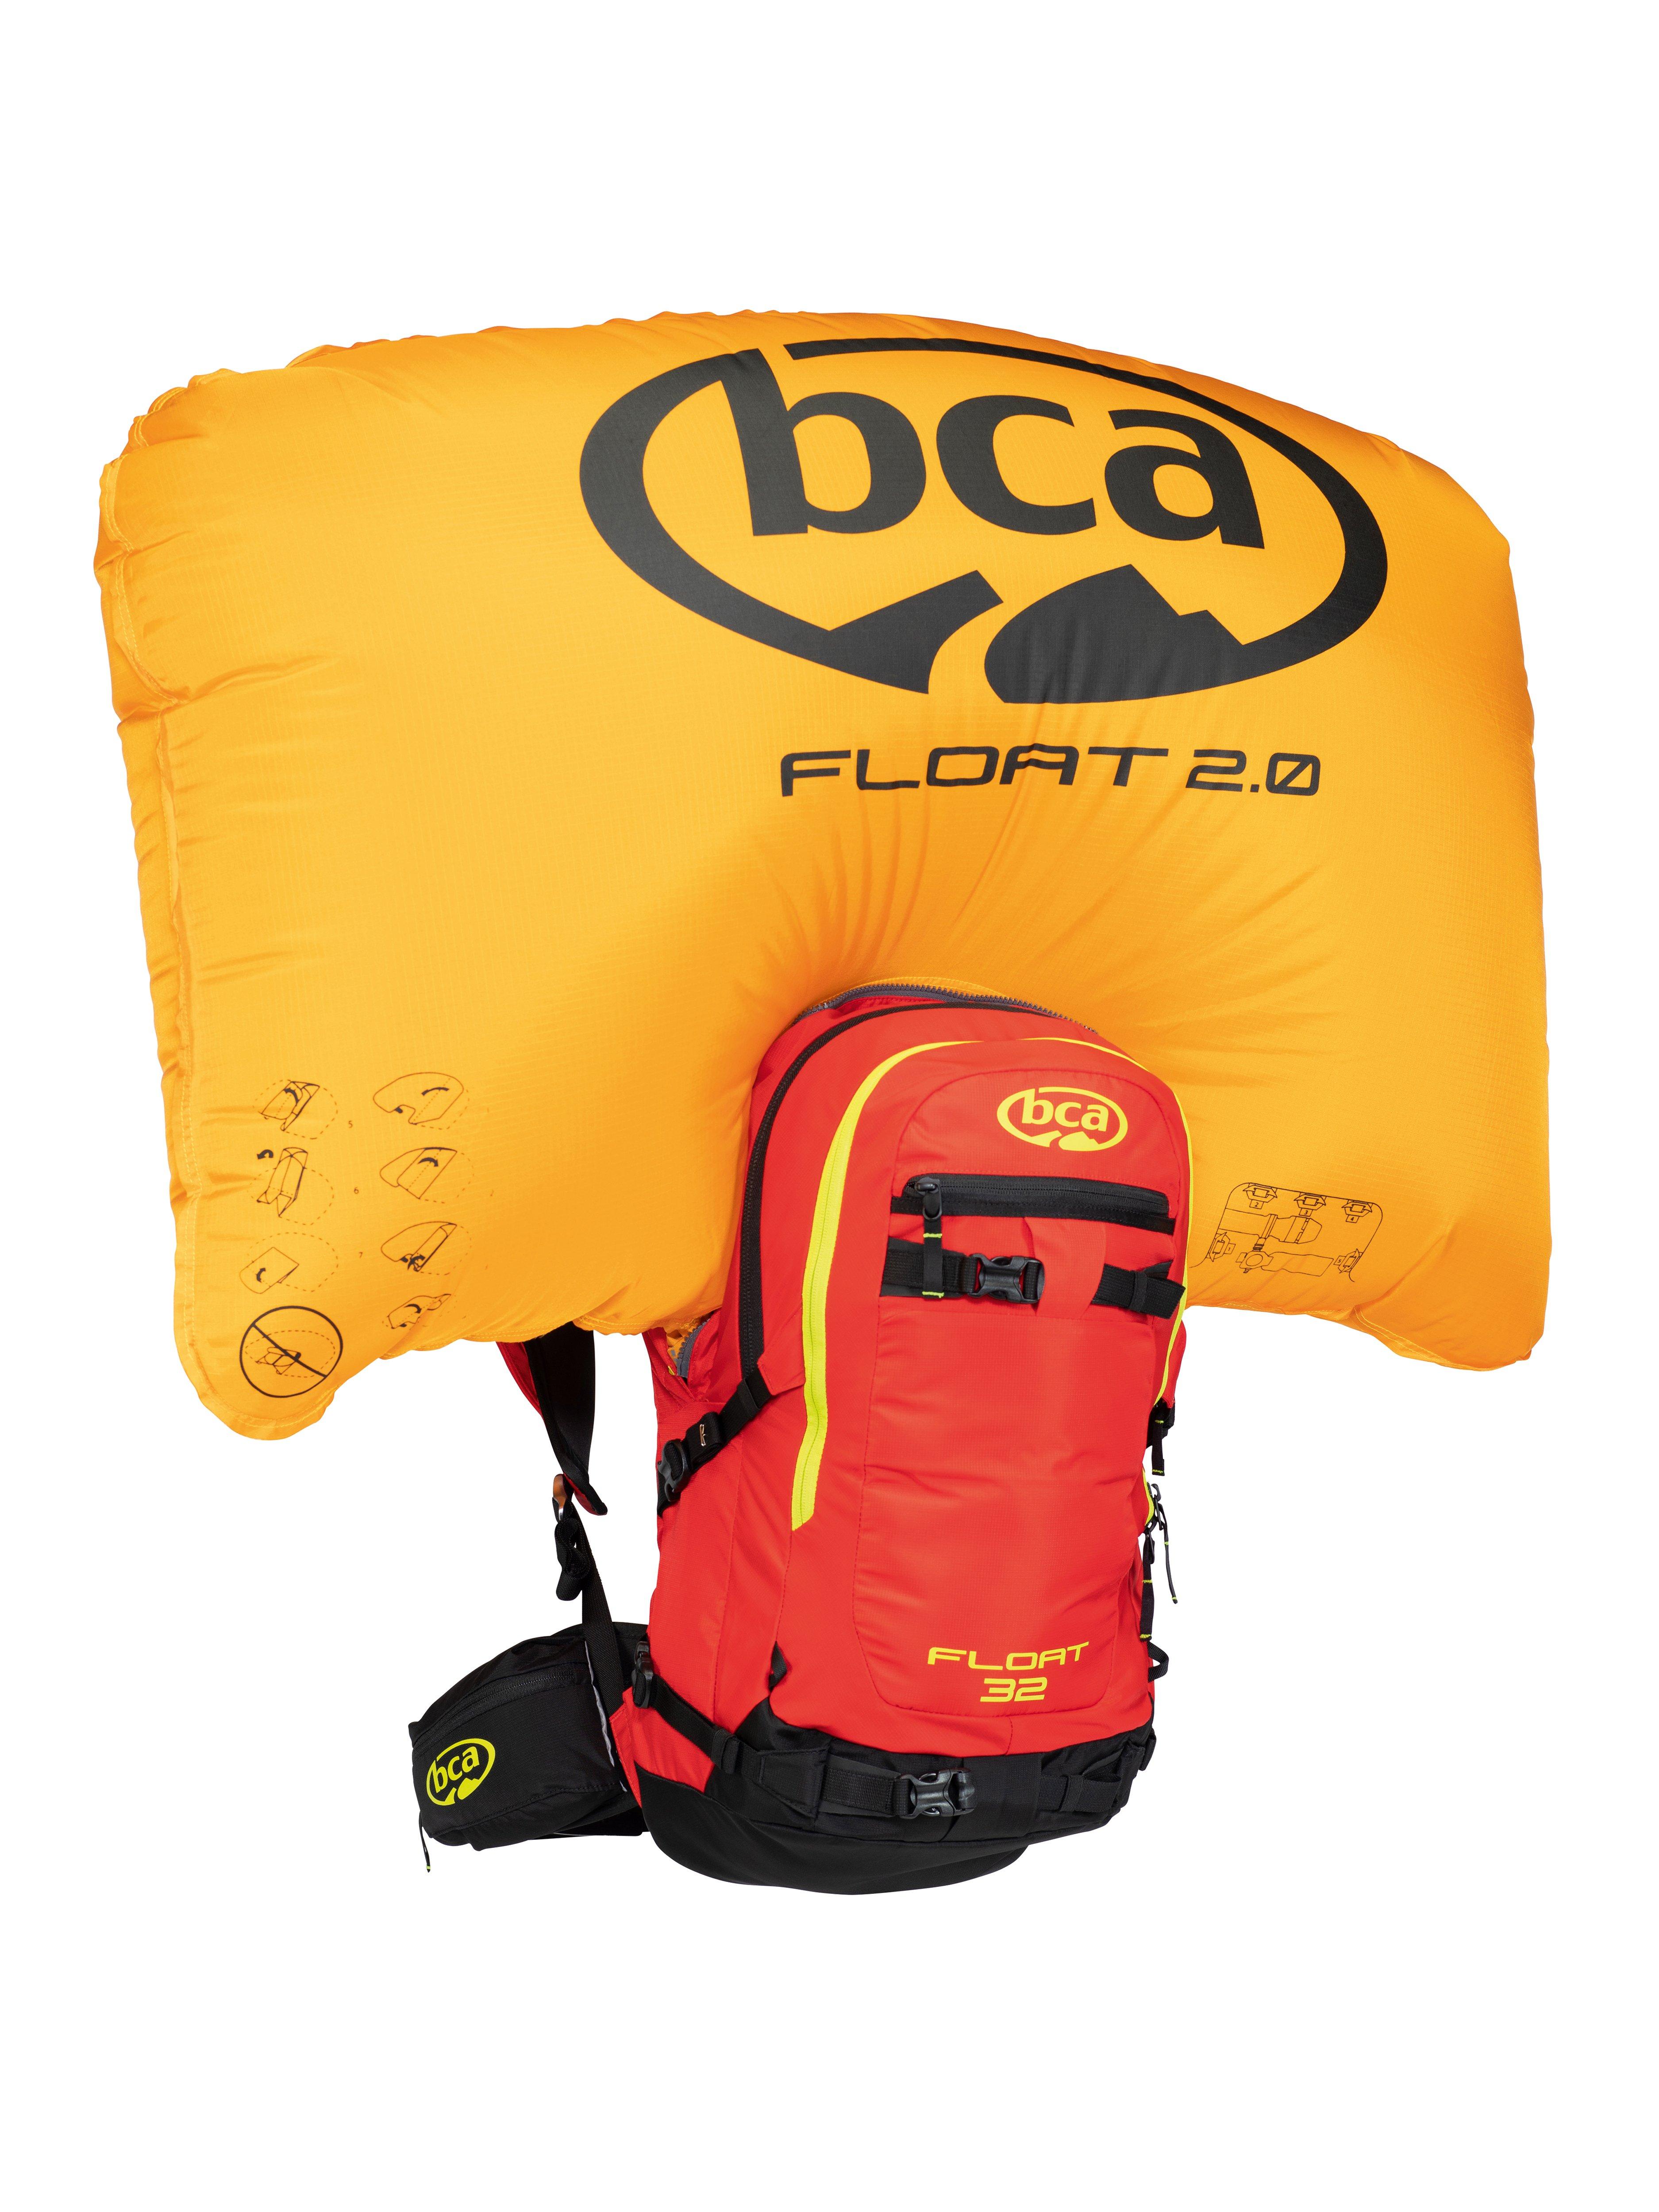 BCA Float 32™ Avalanche Airbag 2.0 | Backcountry Access